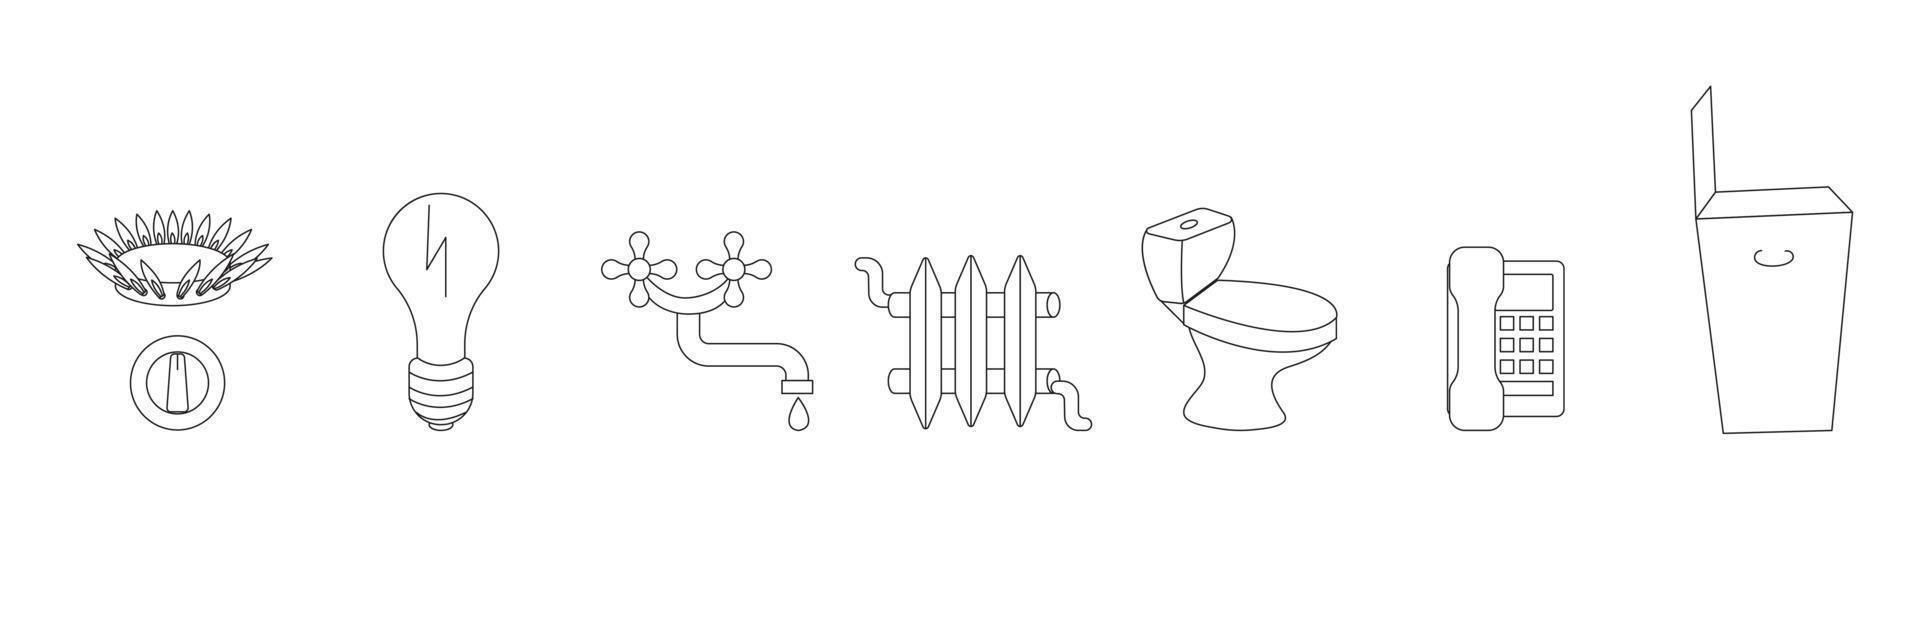 Set of icons in doodle style gas, electricity, water, heating,hone communicatio sewerage, telepn, oncept of garbage collection. vector